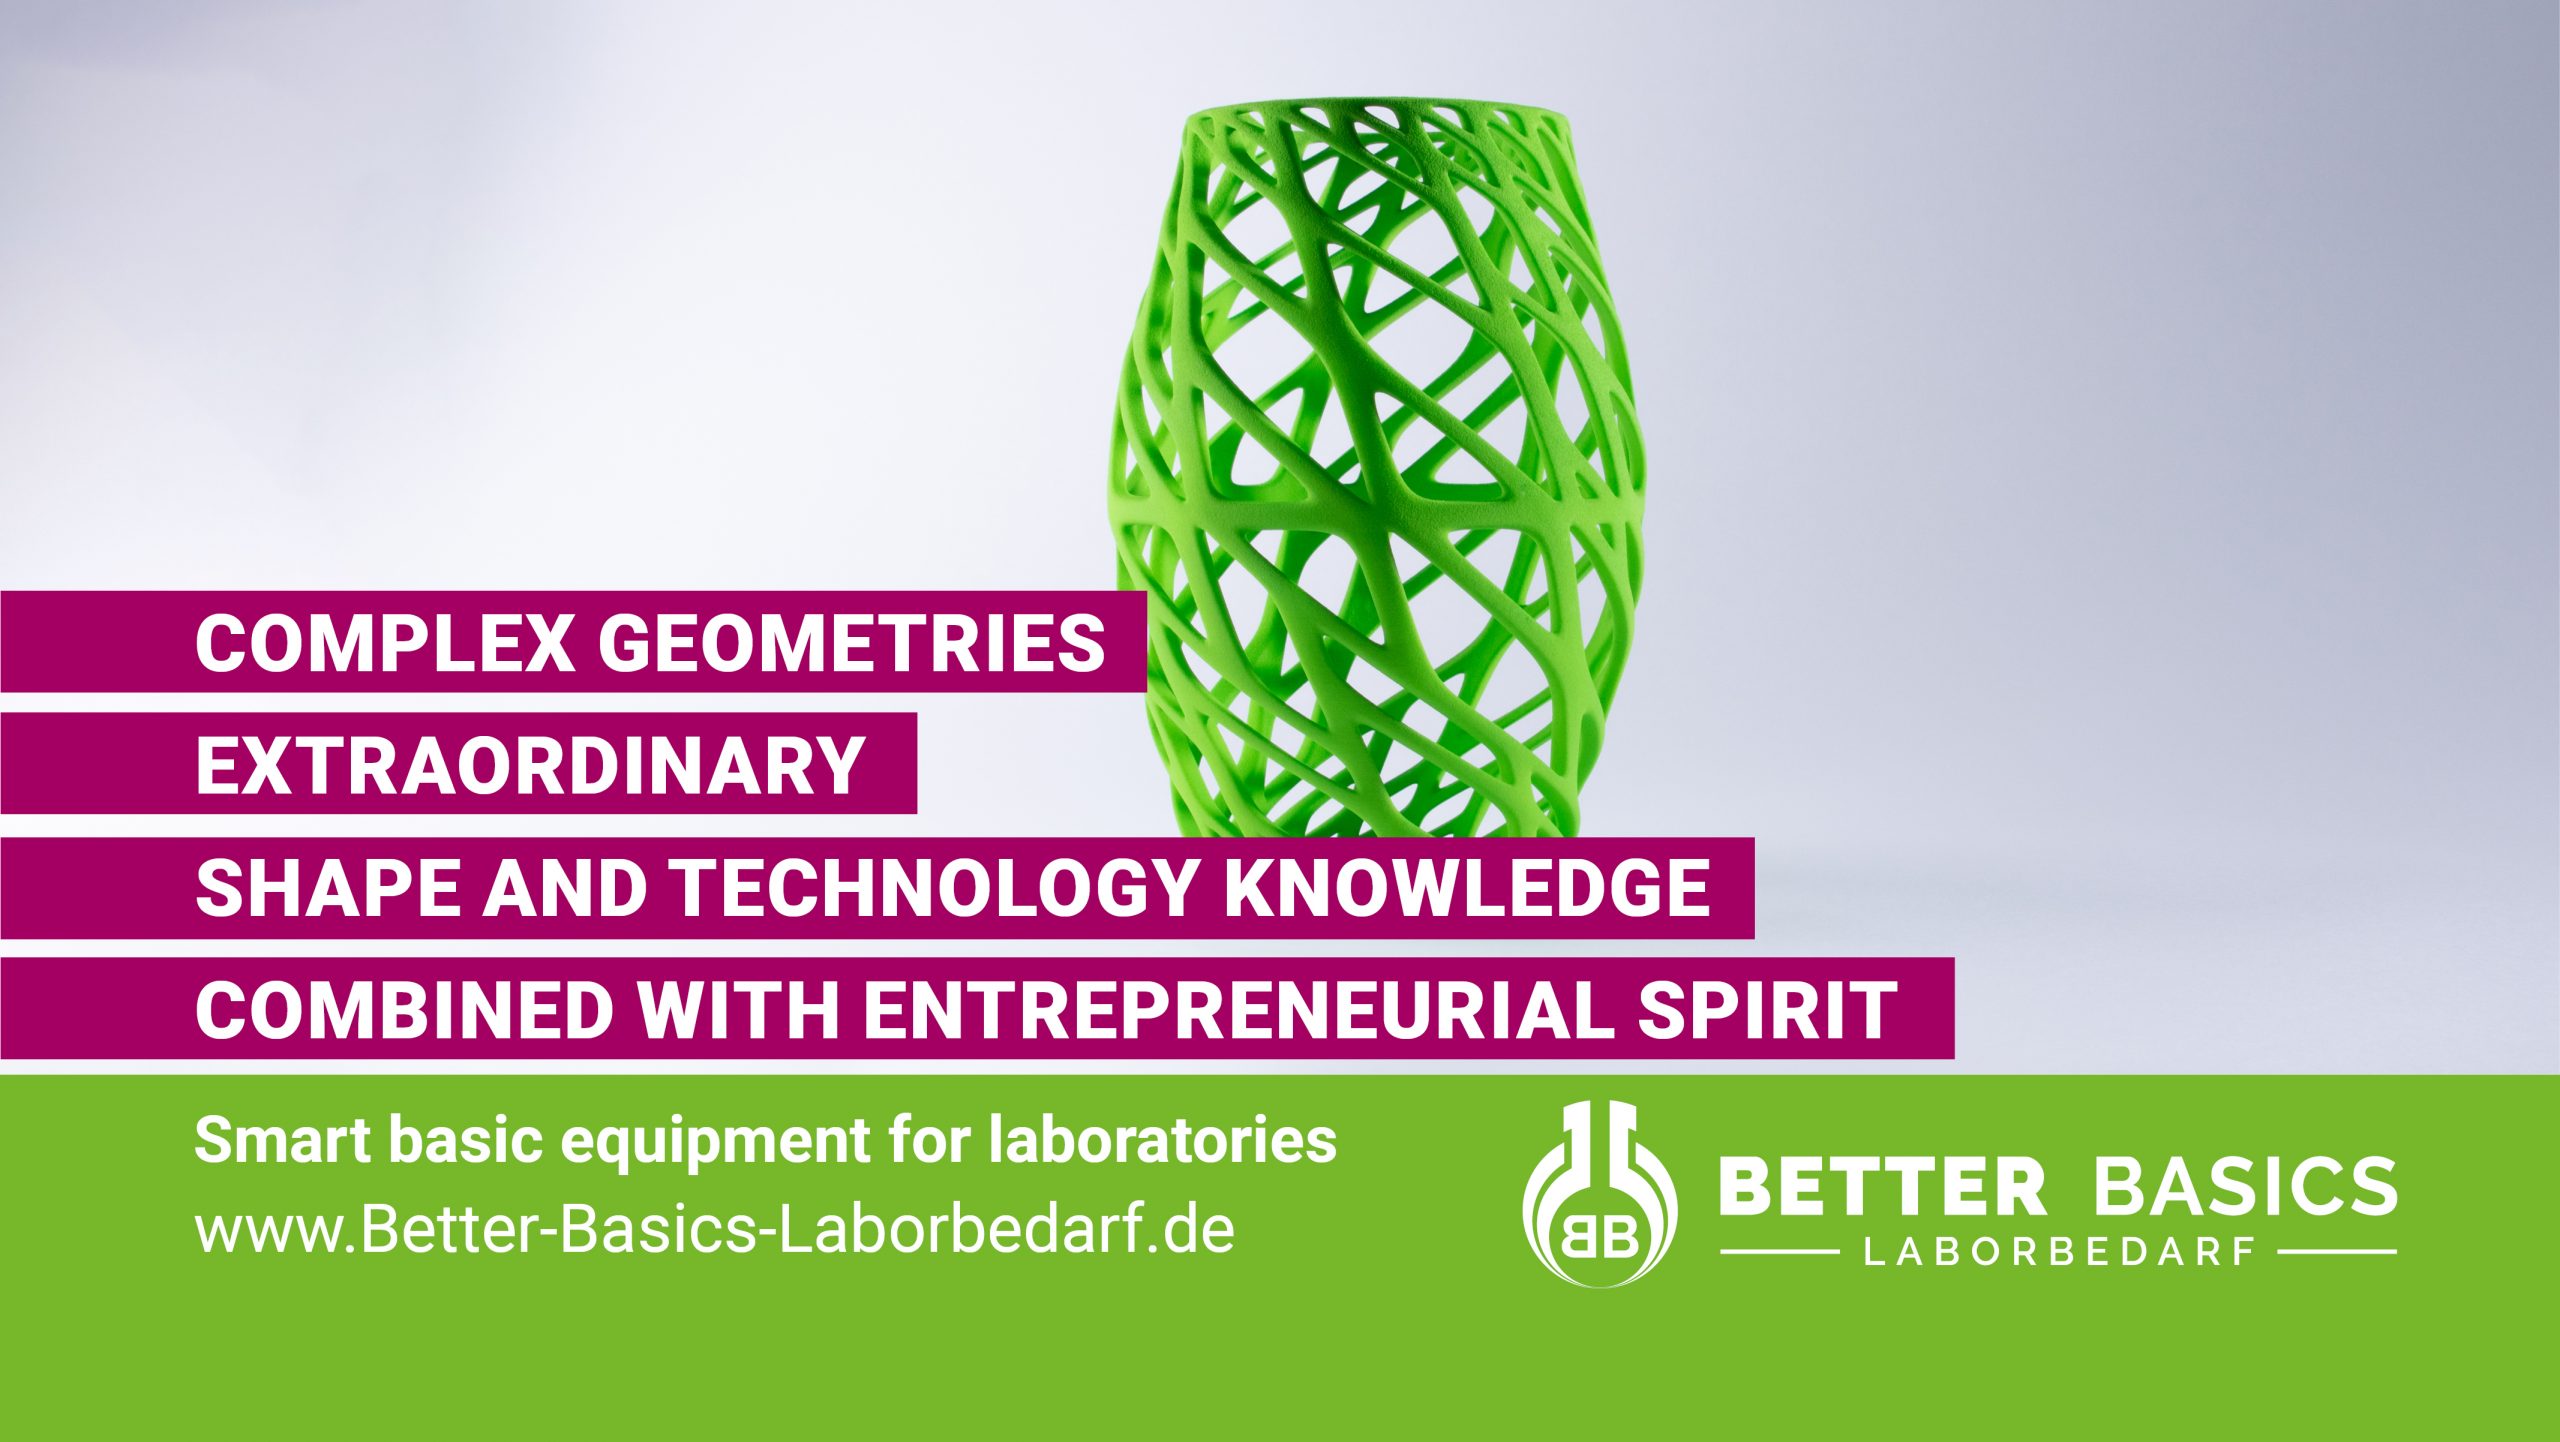 Better Basics Laborbedarf GmbH News Beitrag EN- complex geometries extraordinary shape and technology knowledge combined with entrepeneurial spirit